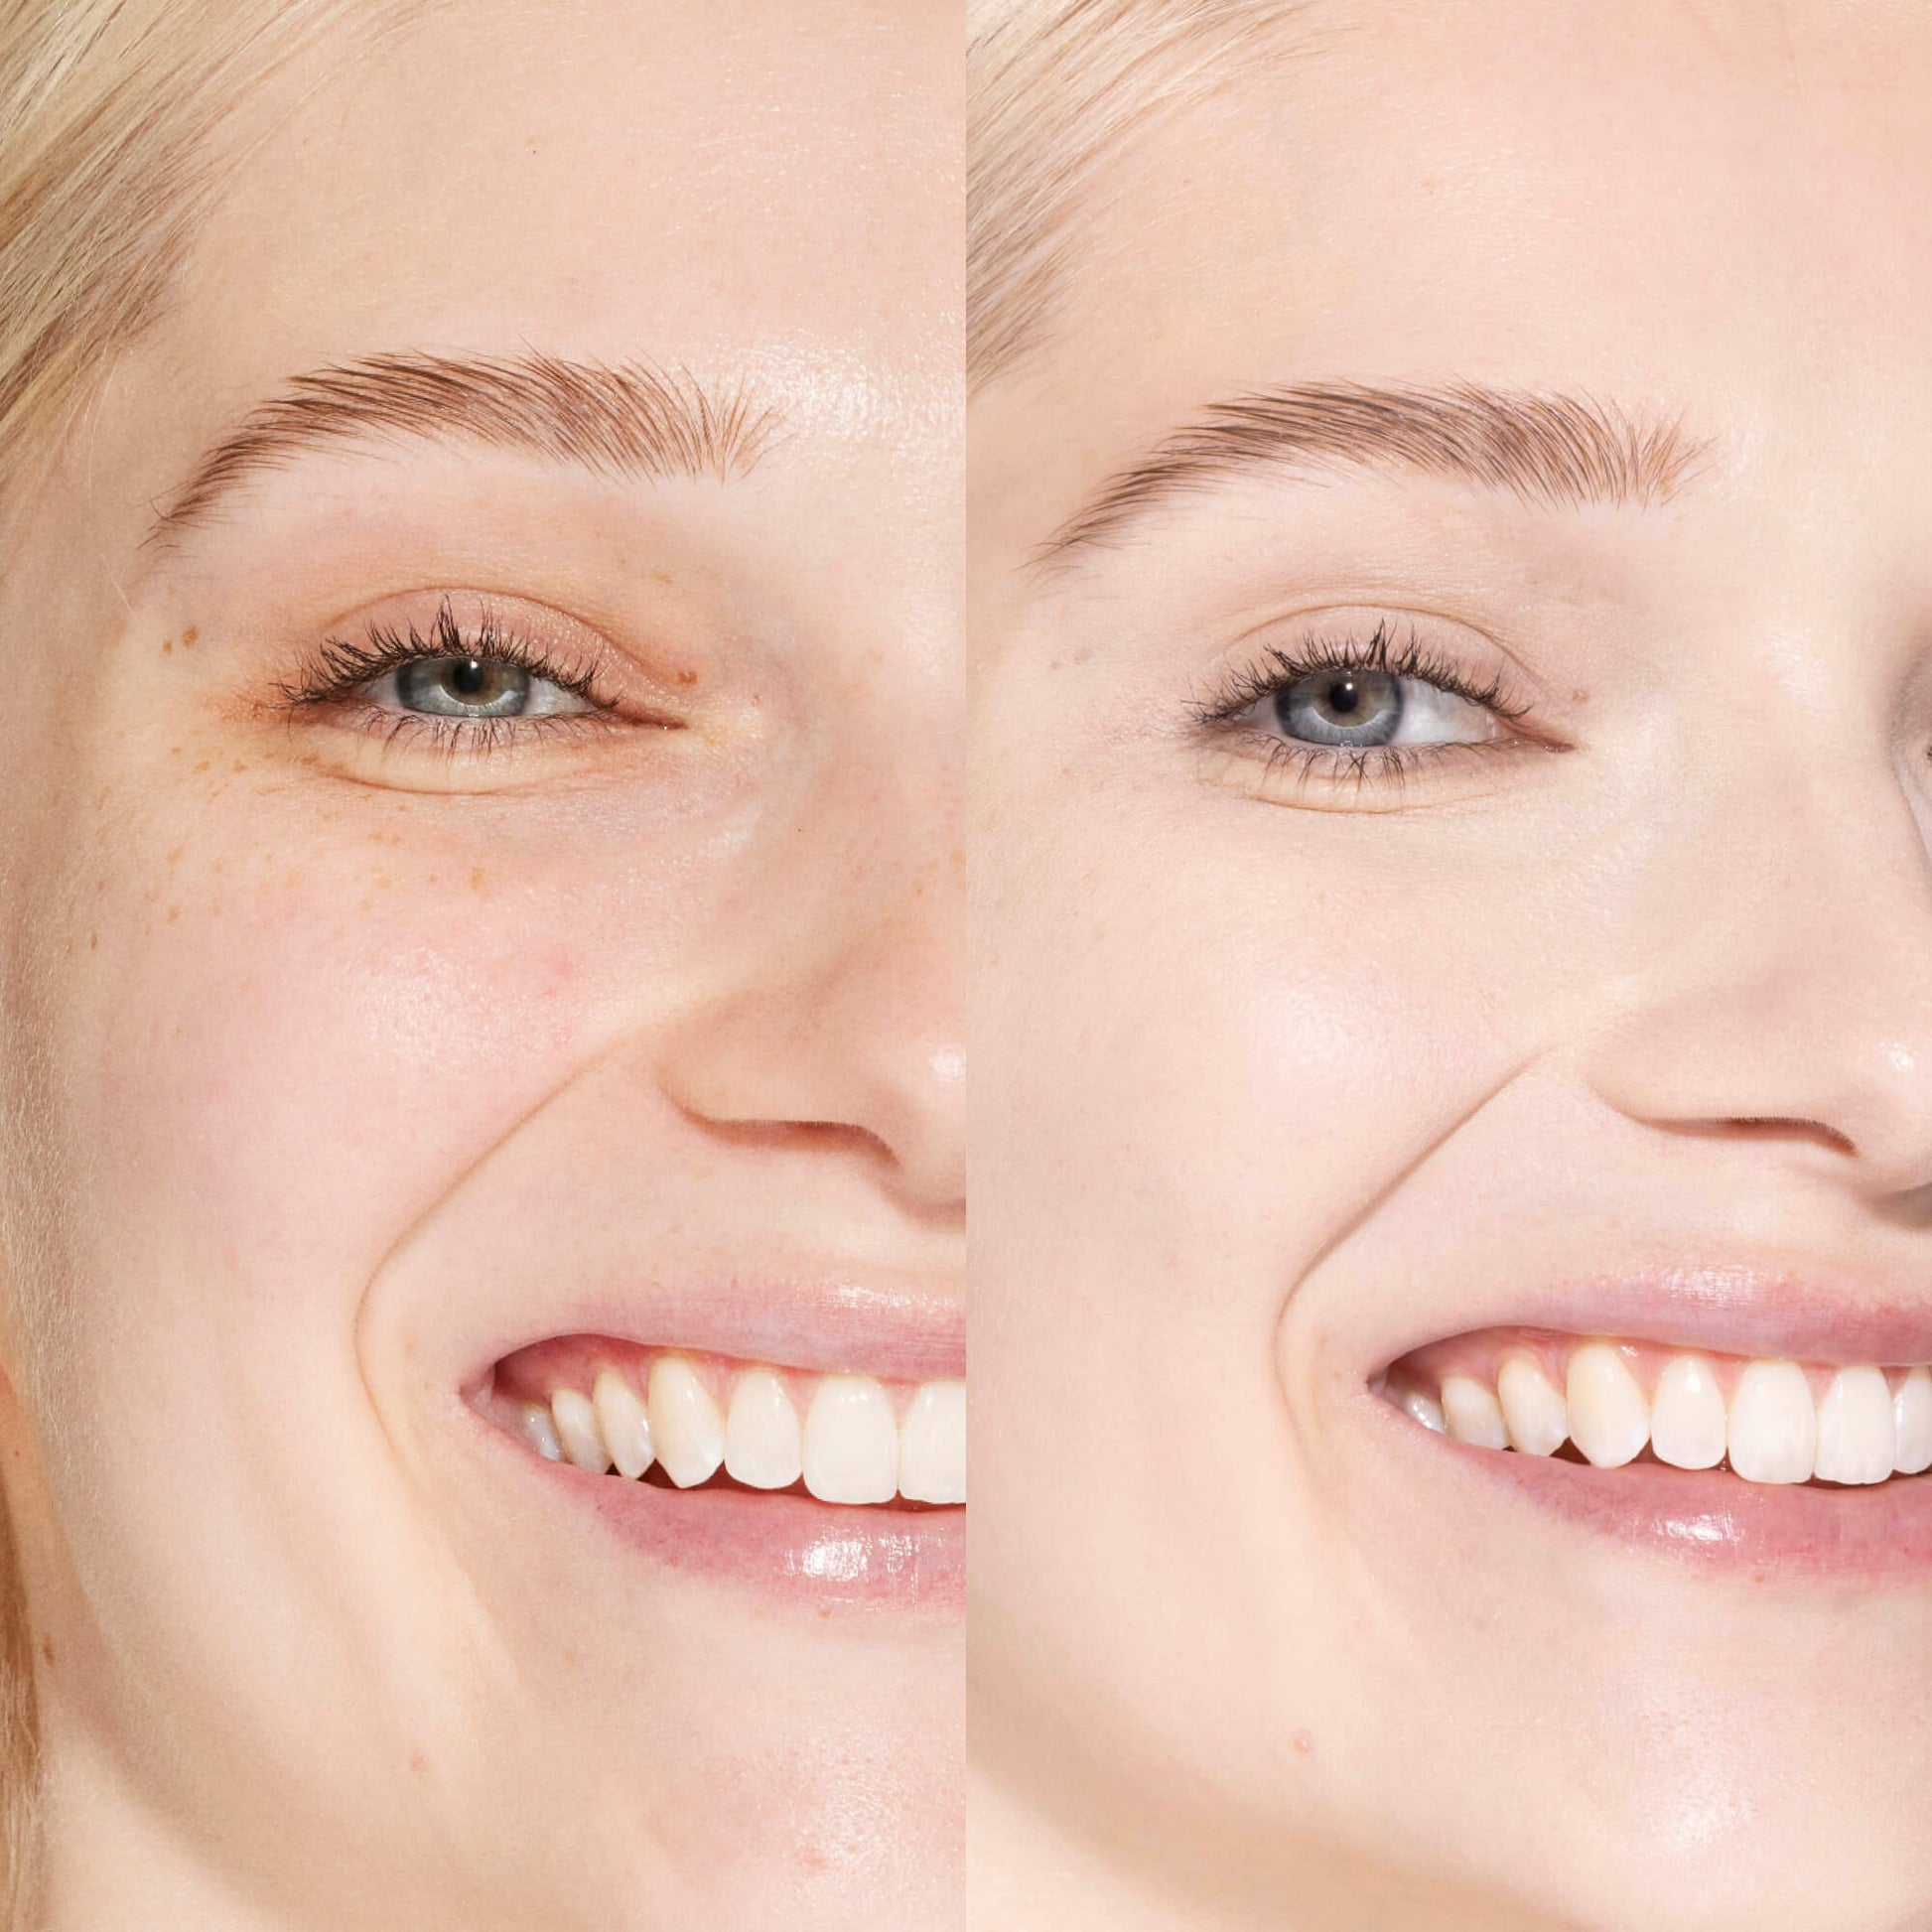 A person's face before and after using Tower 28 Beauty's Swipe Serum Concealer in shade 1.0 BH to cover up dark circles, blemishes, and discoloration